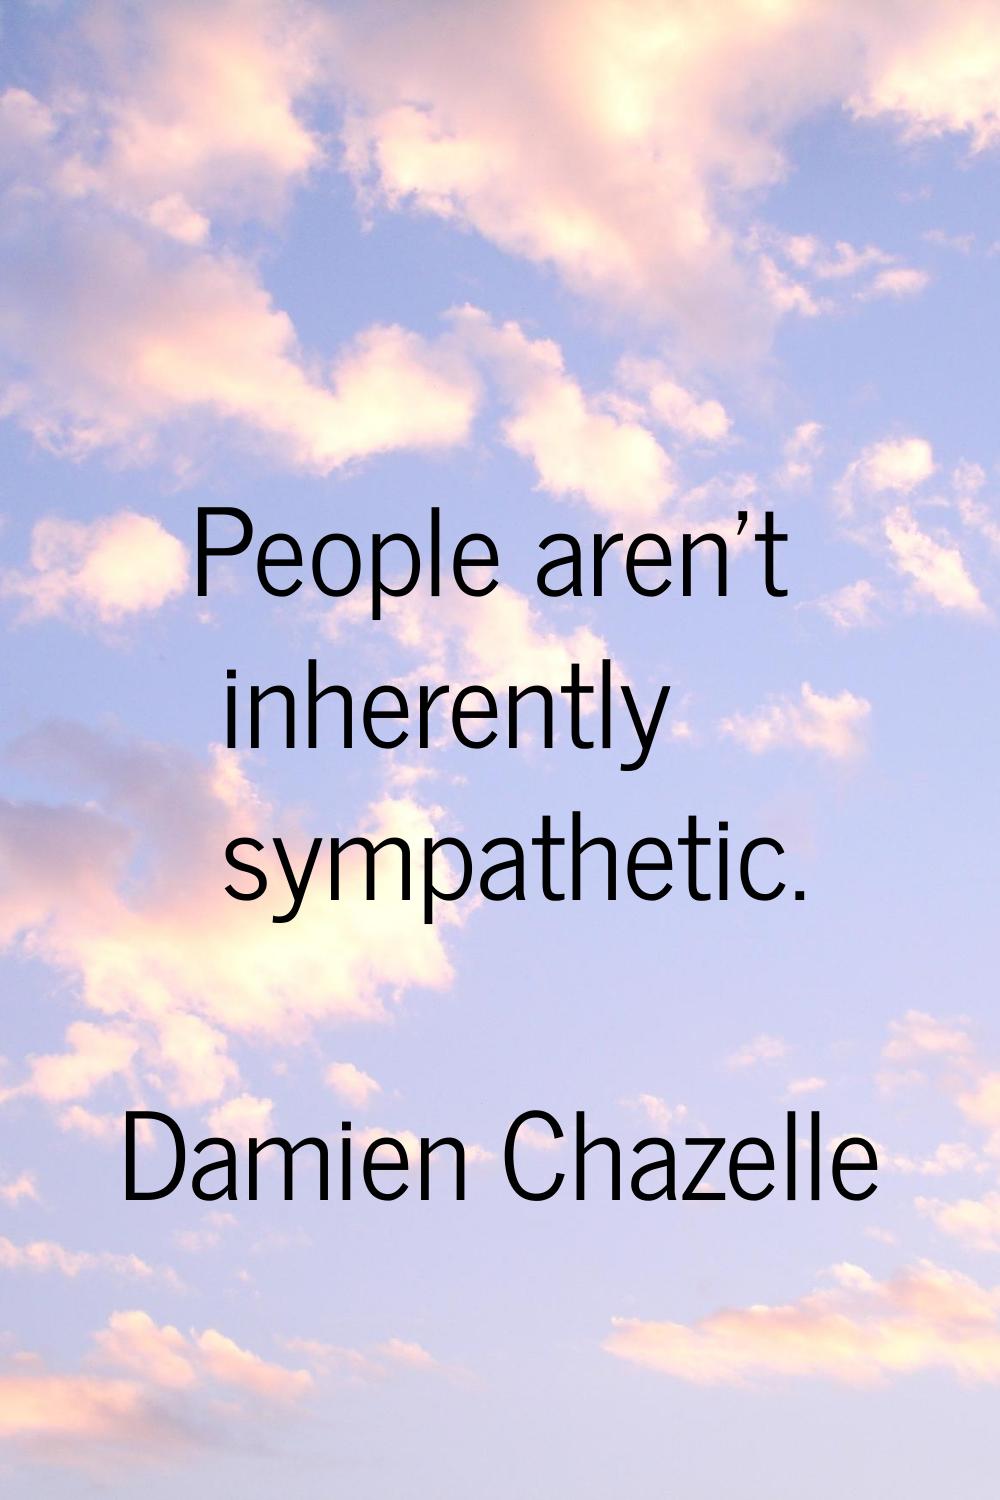 People aren't inherently sympathetic.